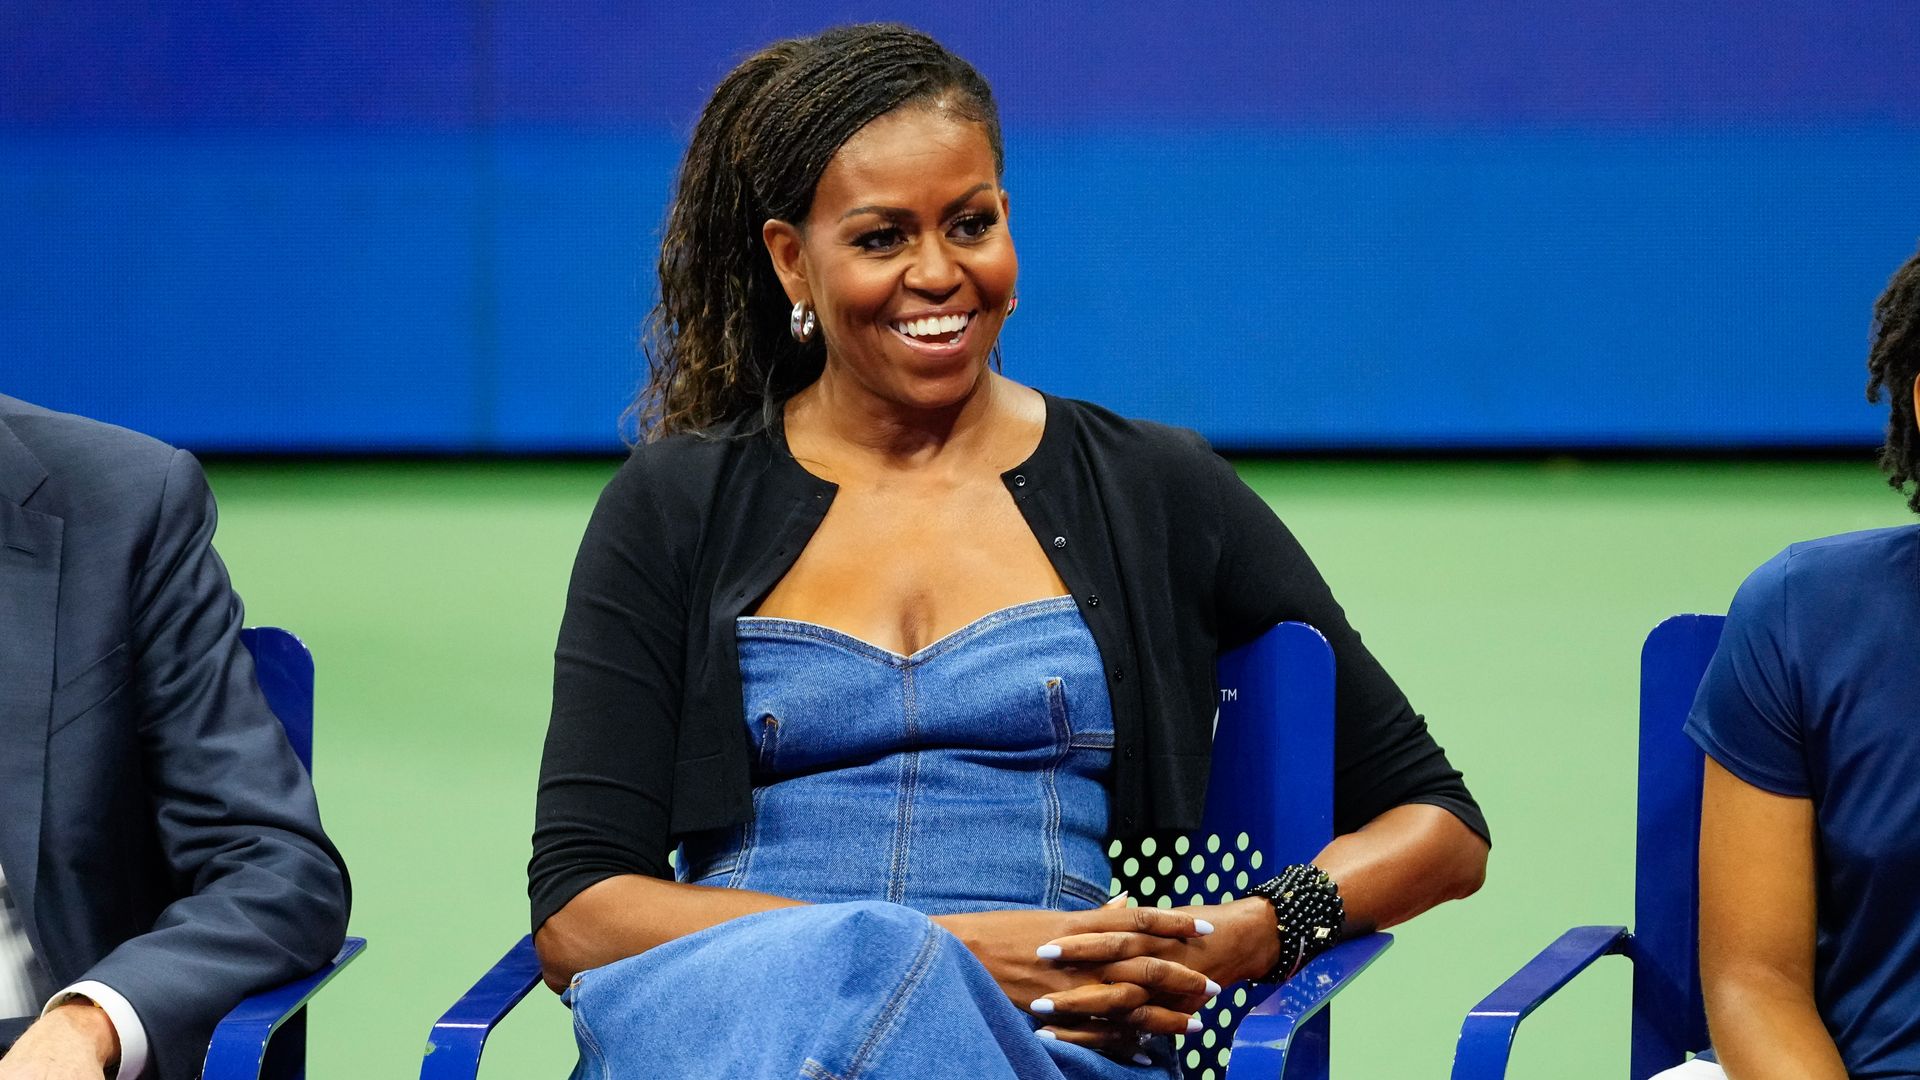 Michelle Obama shared a message for Juneteenth, reminding voters to participate in their elections